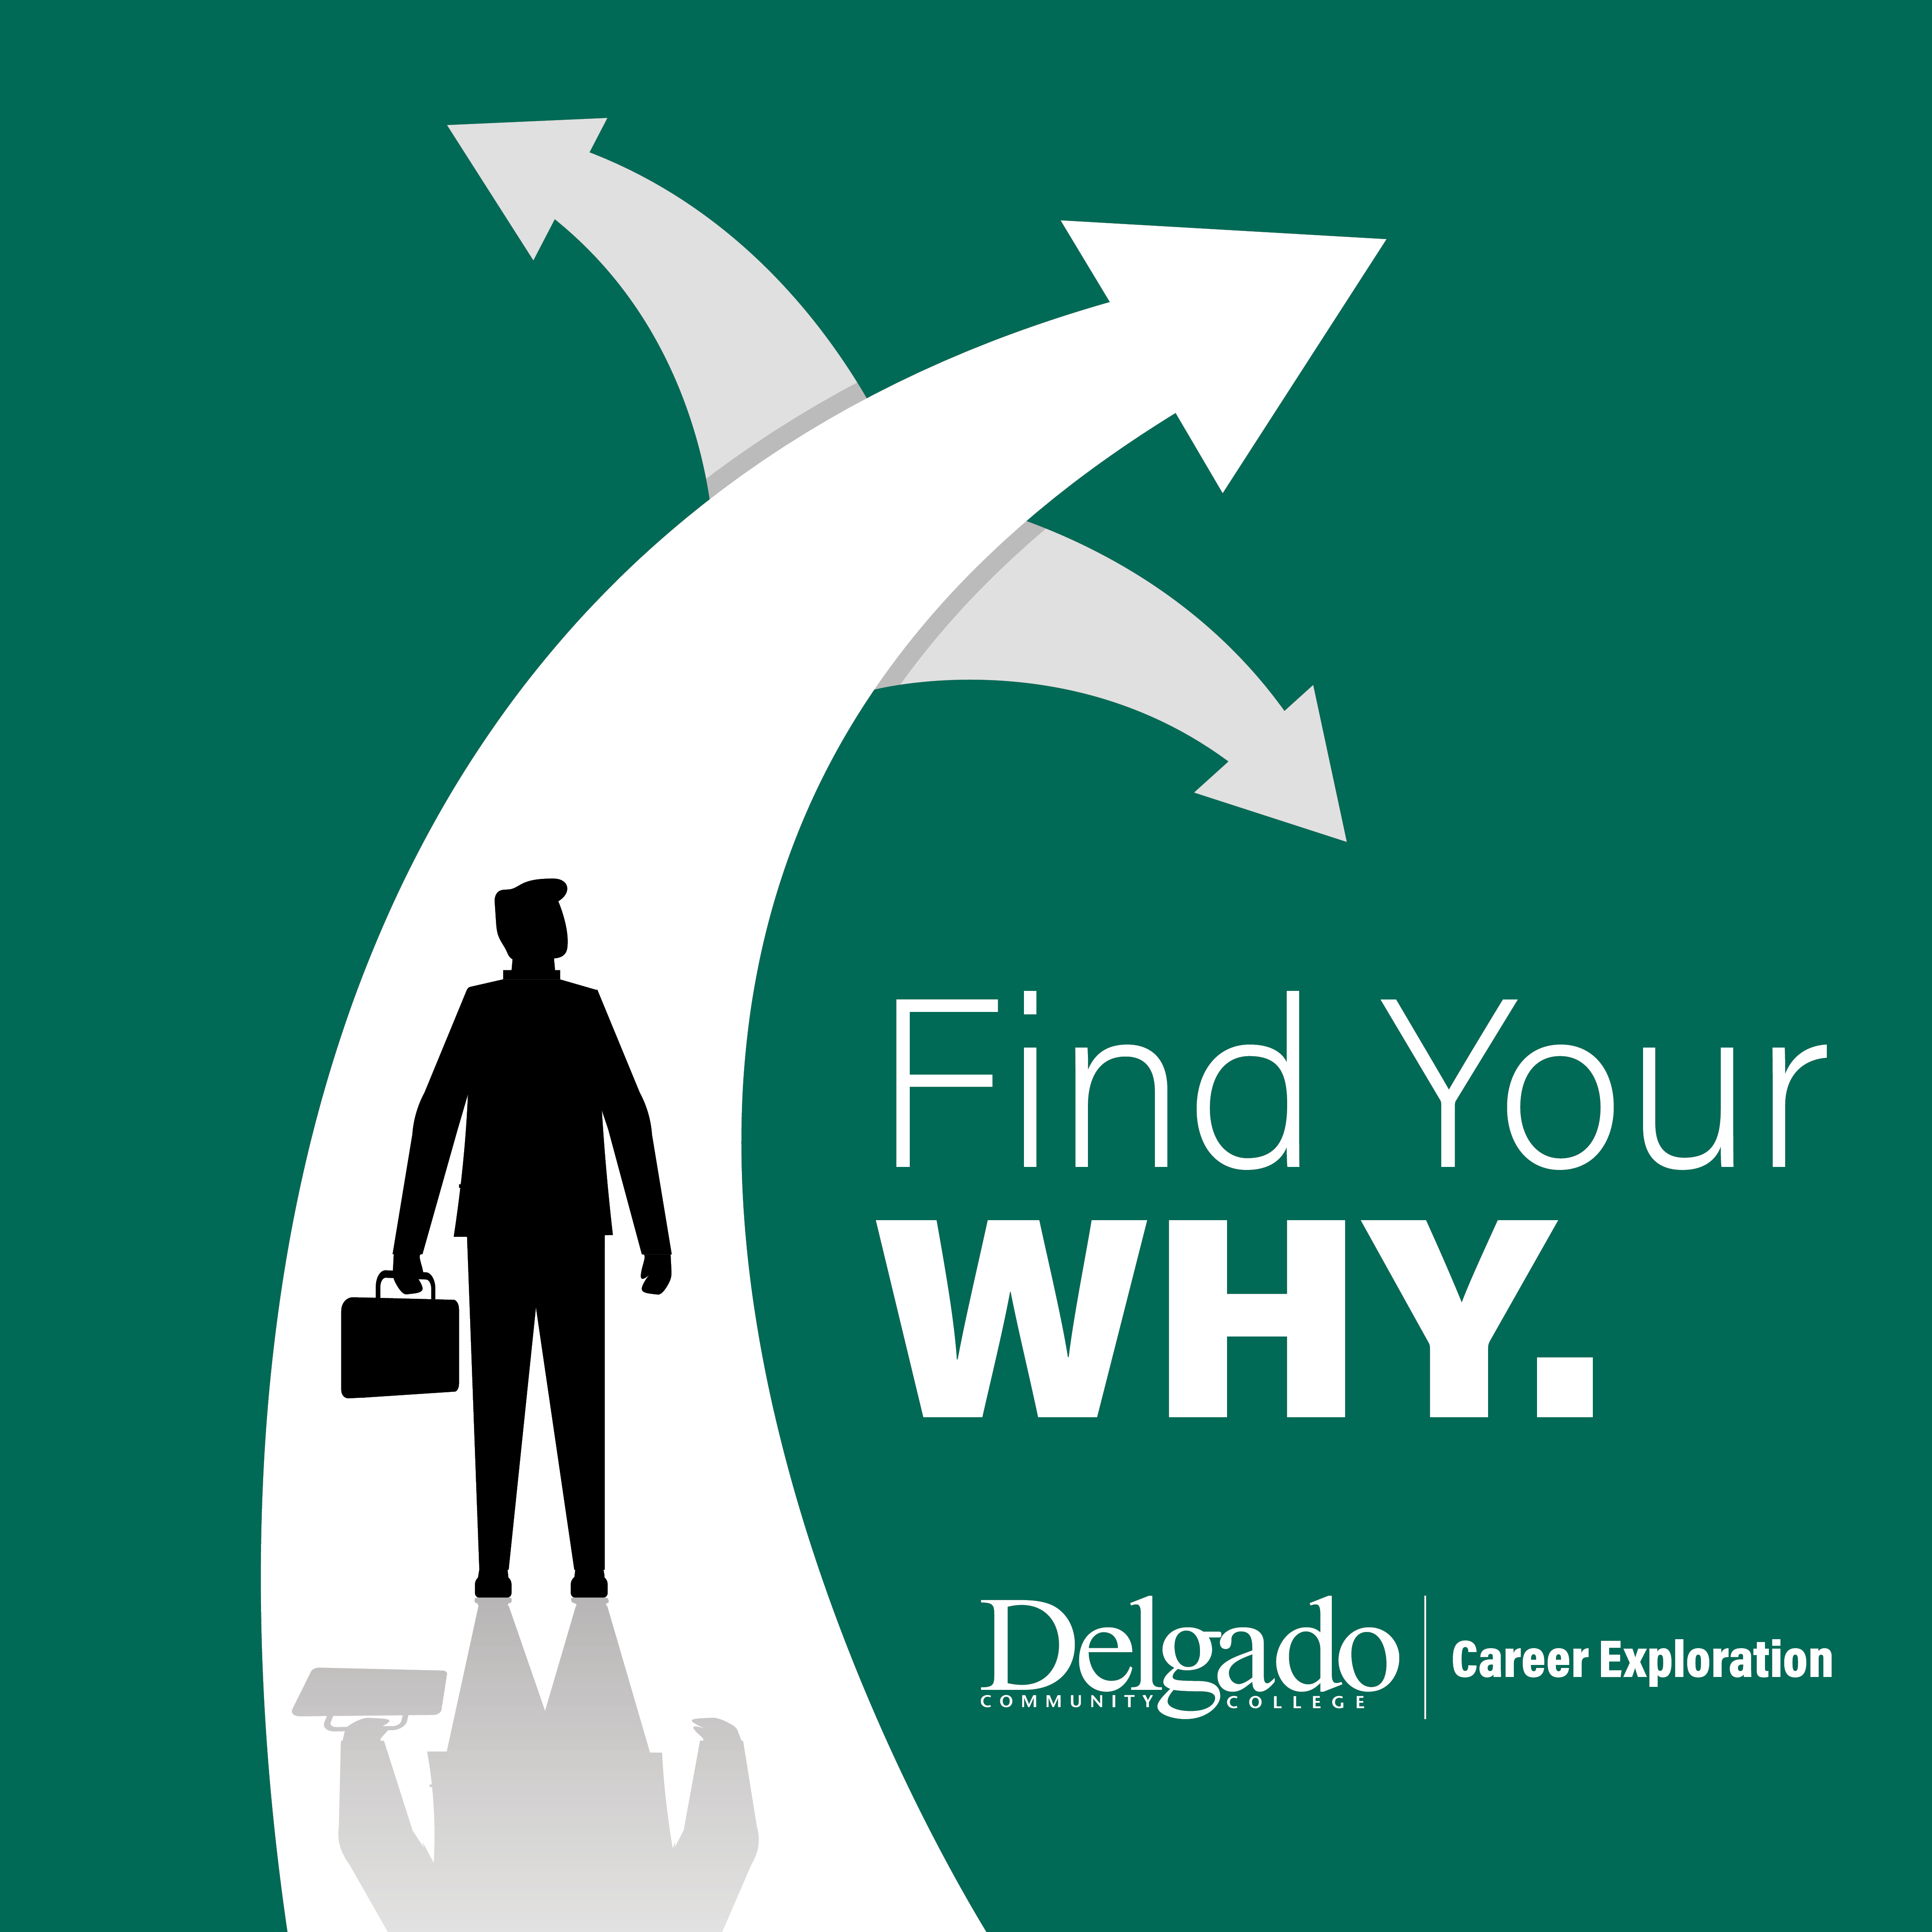 sillouette of a person on a path that points in 3 different directions. Find Your WHY. Delgado logo and career exploration